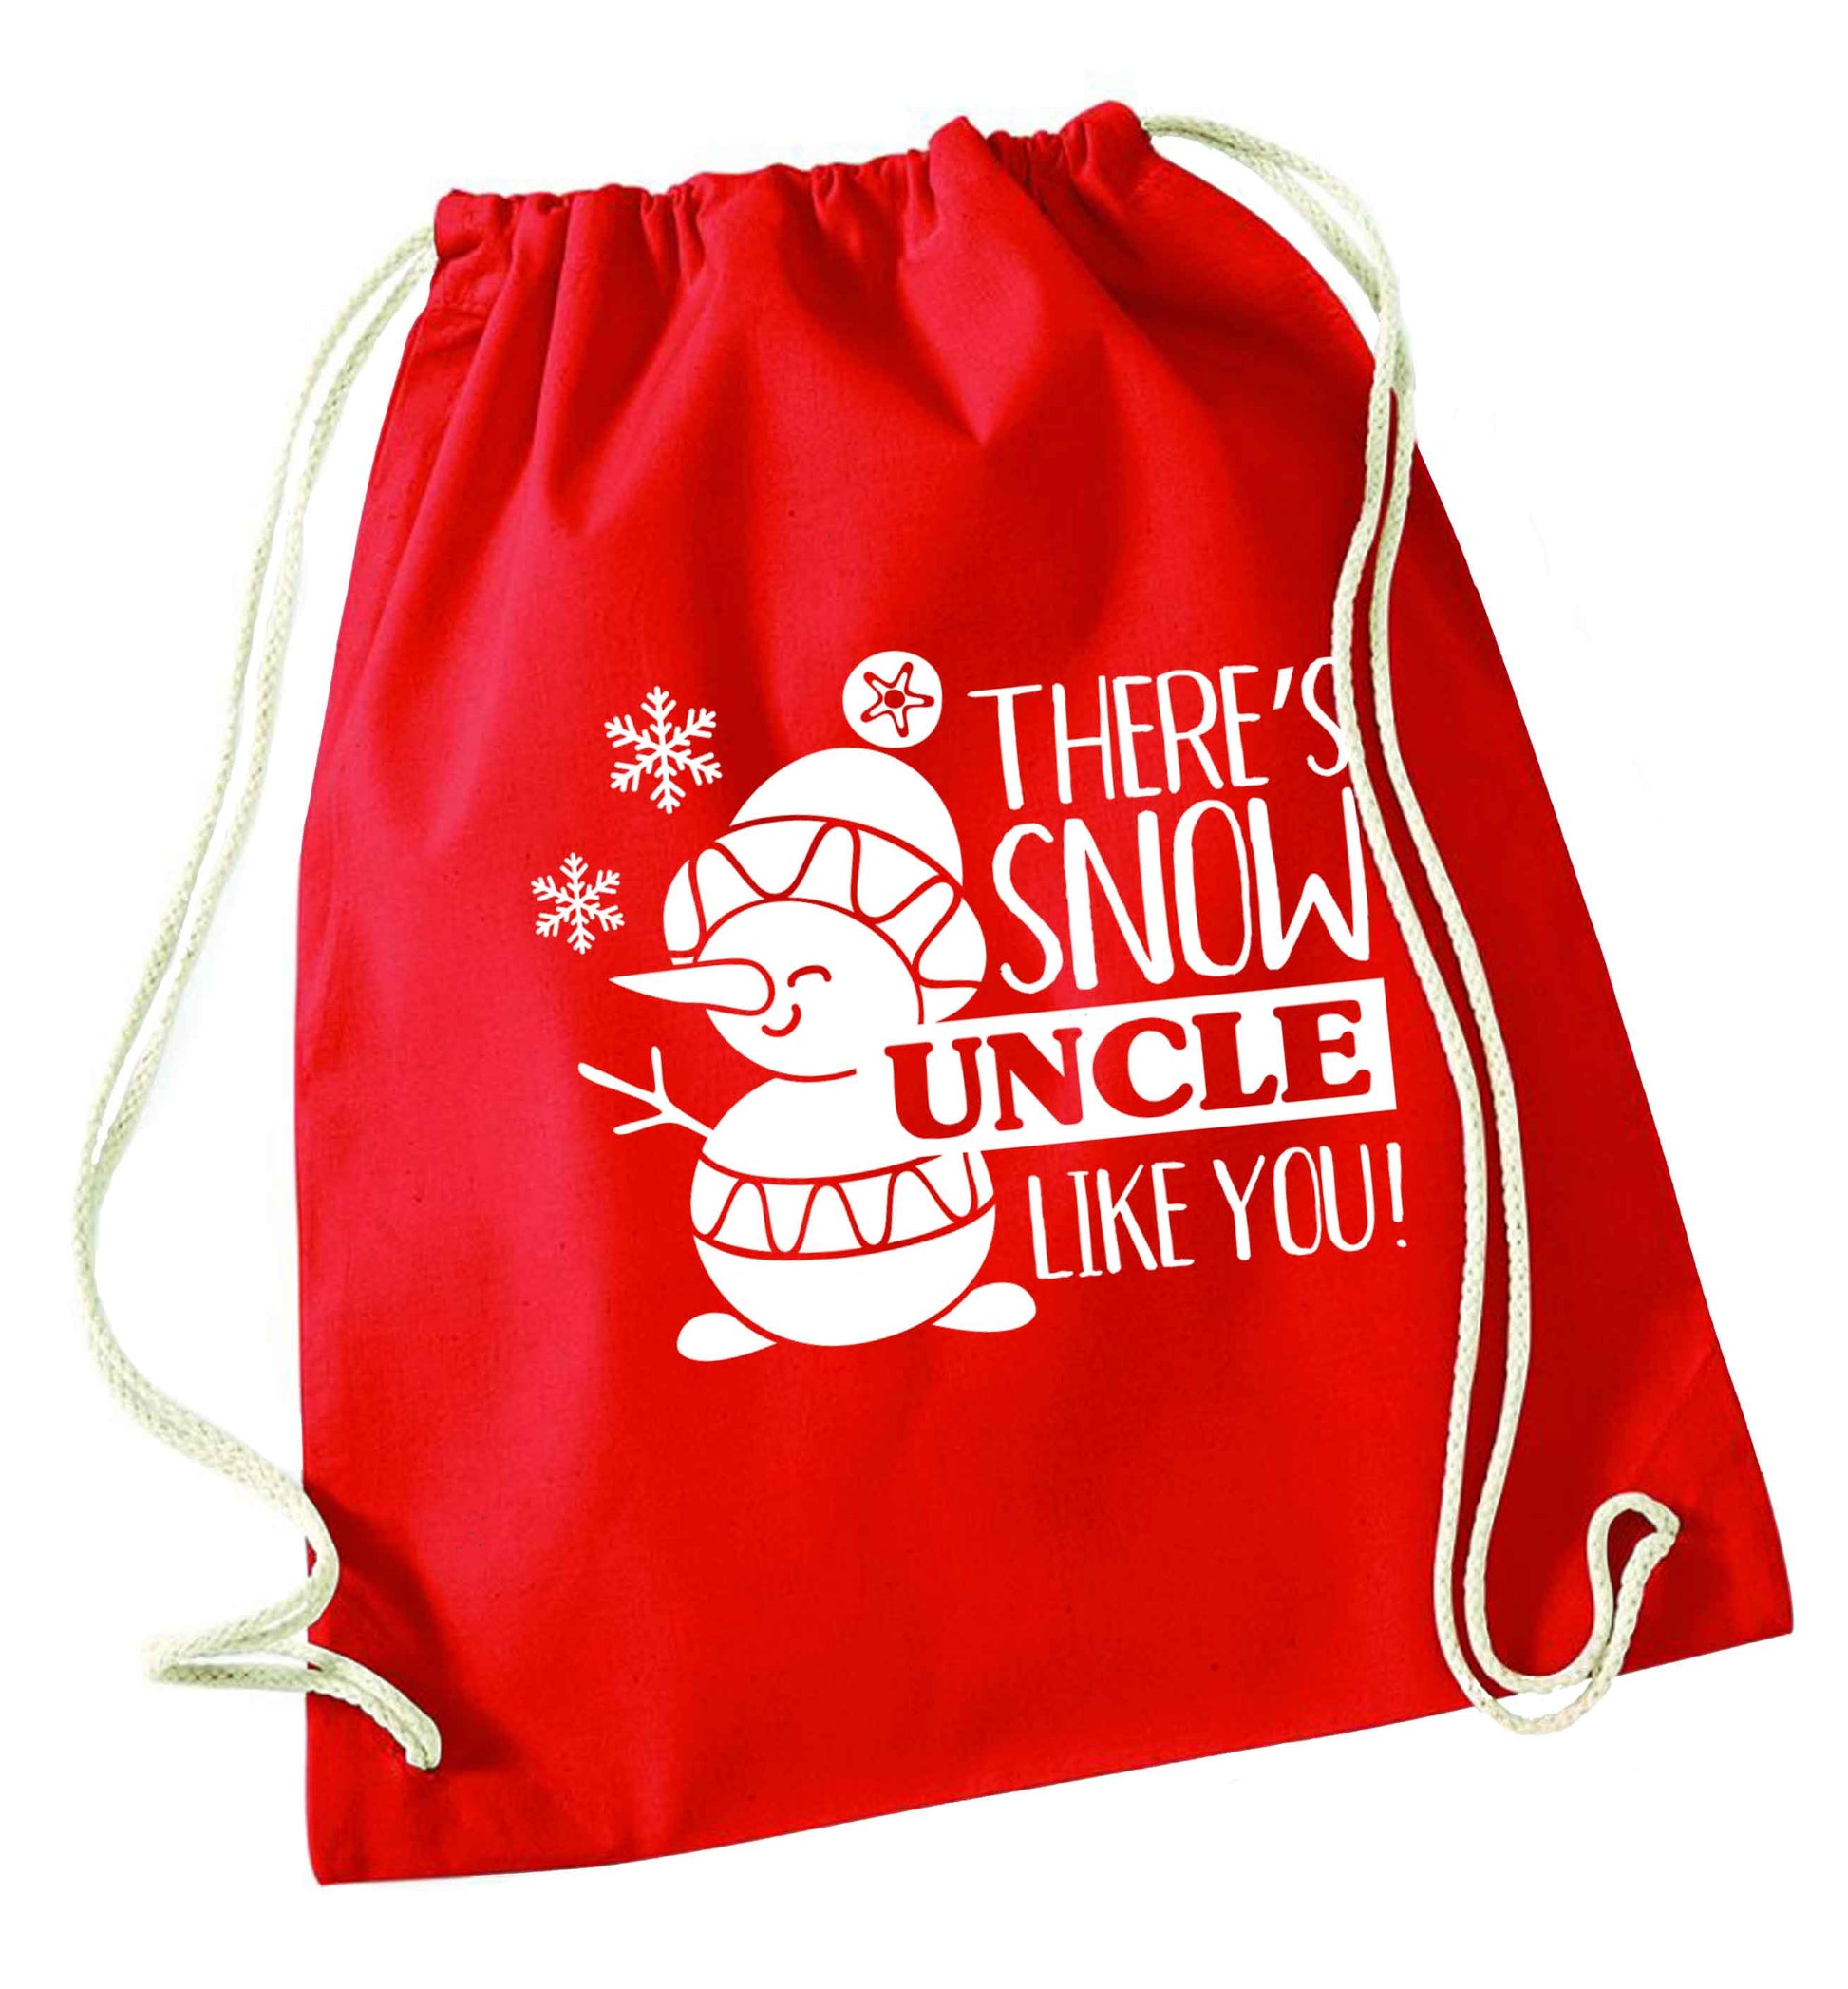 There's snow uncle like you red drawstring bag 